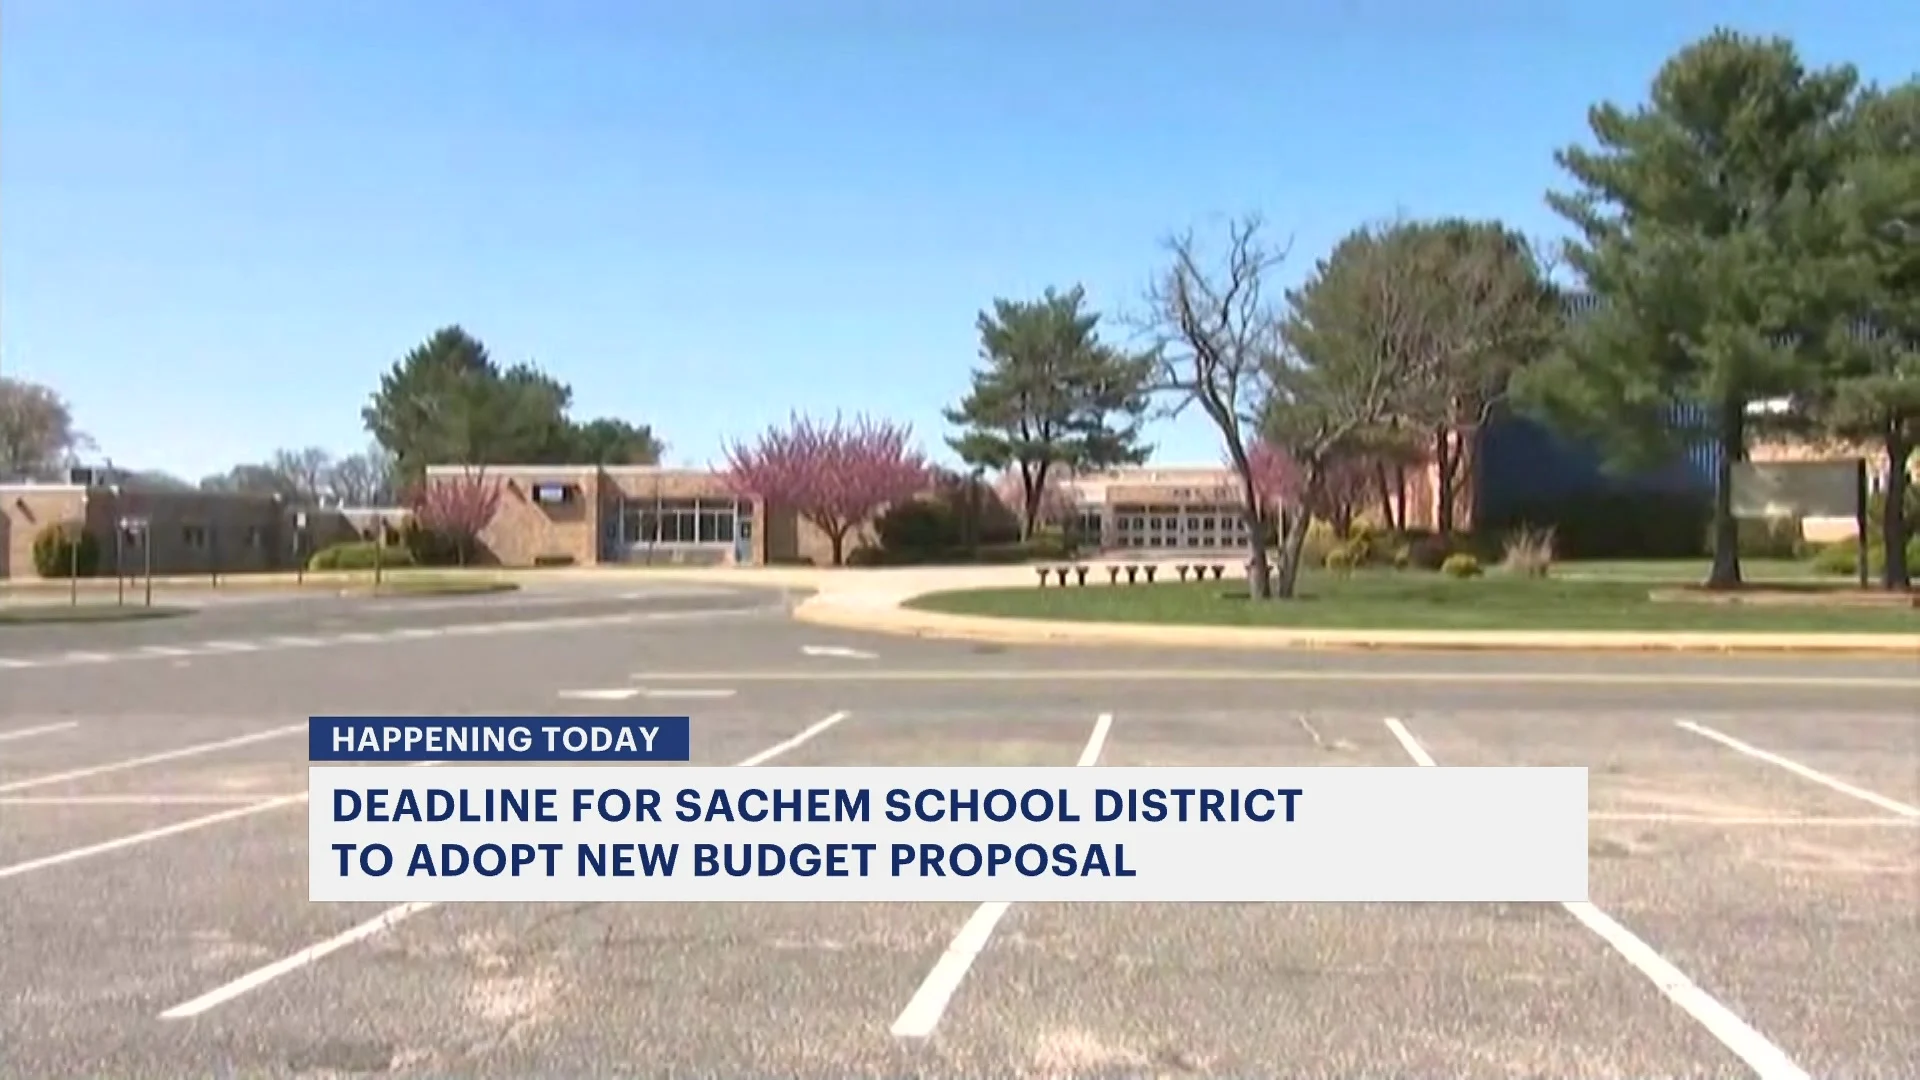 Deadline day for Sachem School District to adopt new budget proposal